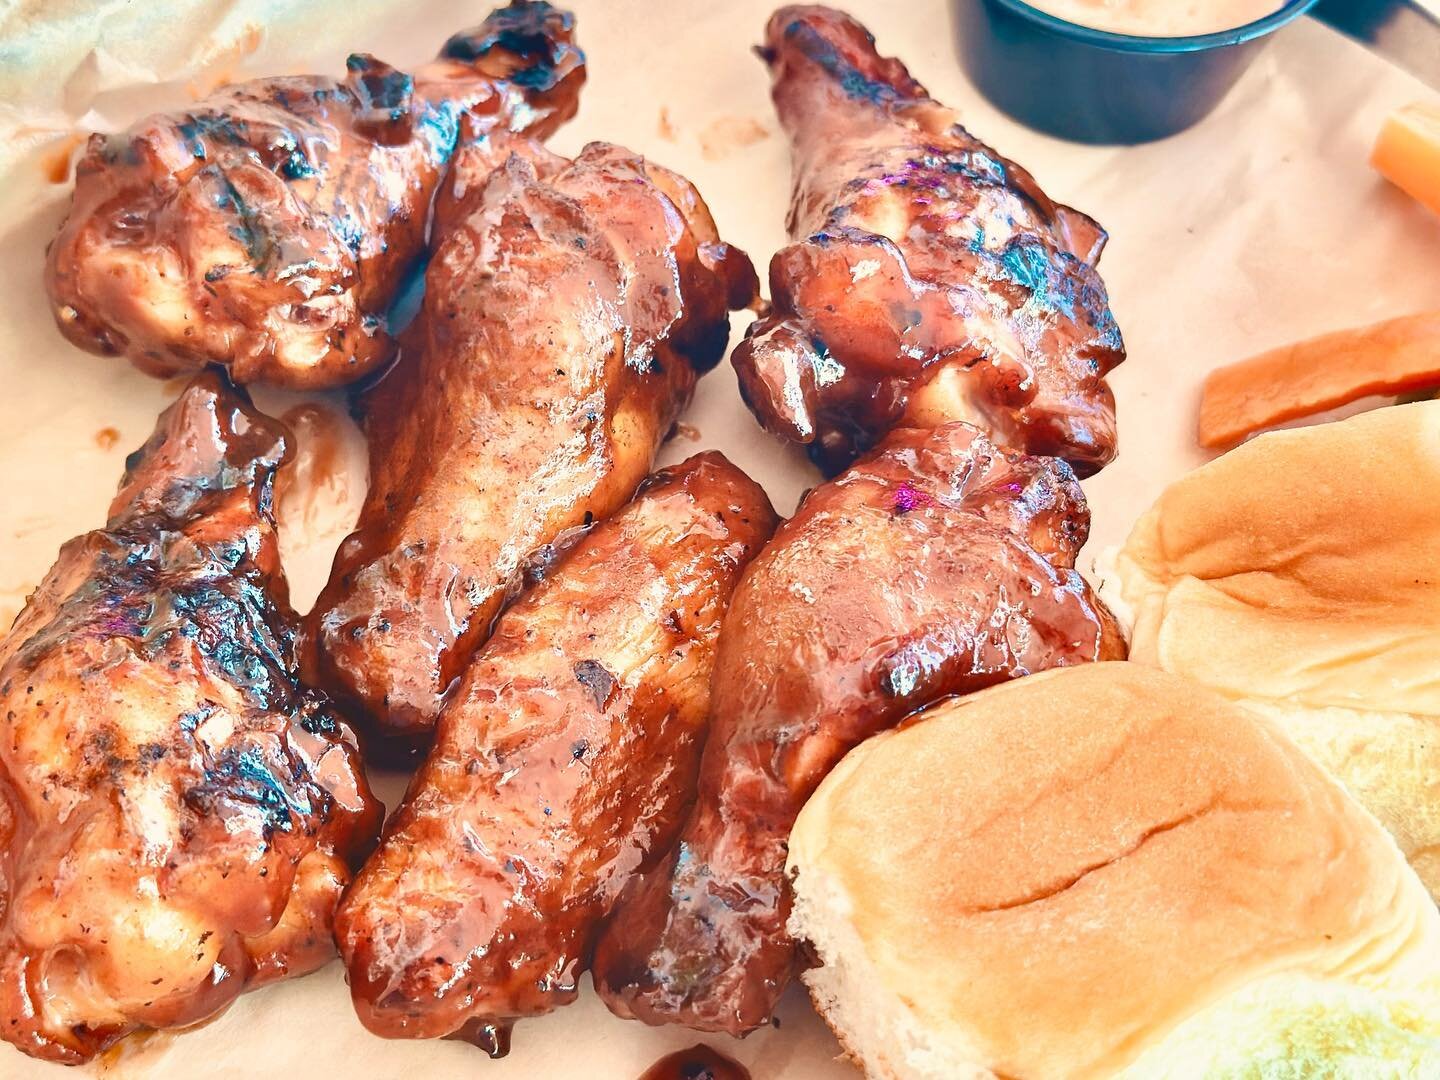 Our Chicken Wings are always Smoked to perfection, never breaded or fried! 💨 

BBQ menu available now through Sunday, while supplies last 🍽️🍖

#smokedmeat #winebar #smokedwings #chickenwings #gulfportfl #gulfportflorida #stpetefl #stpetersburgfl #